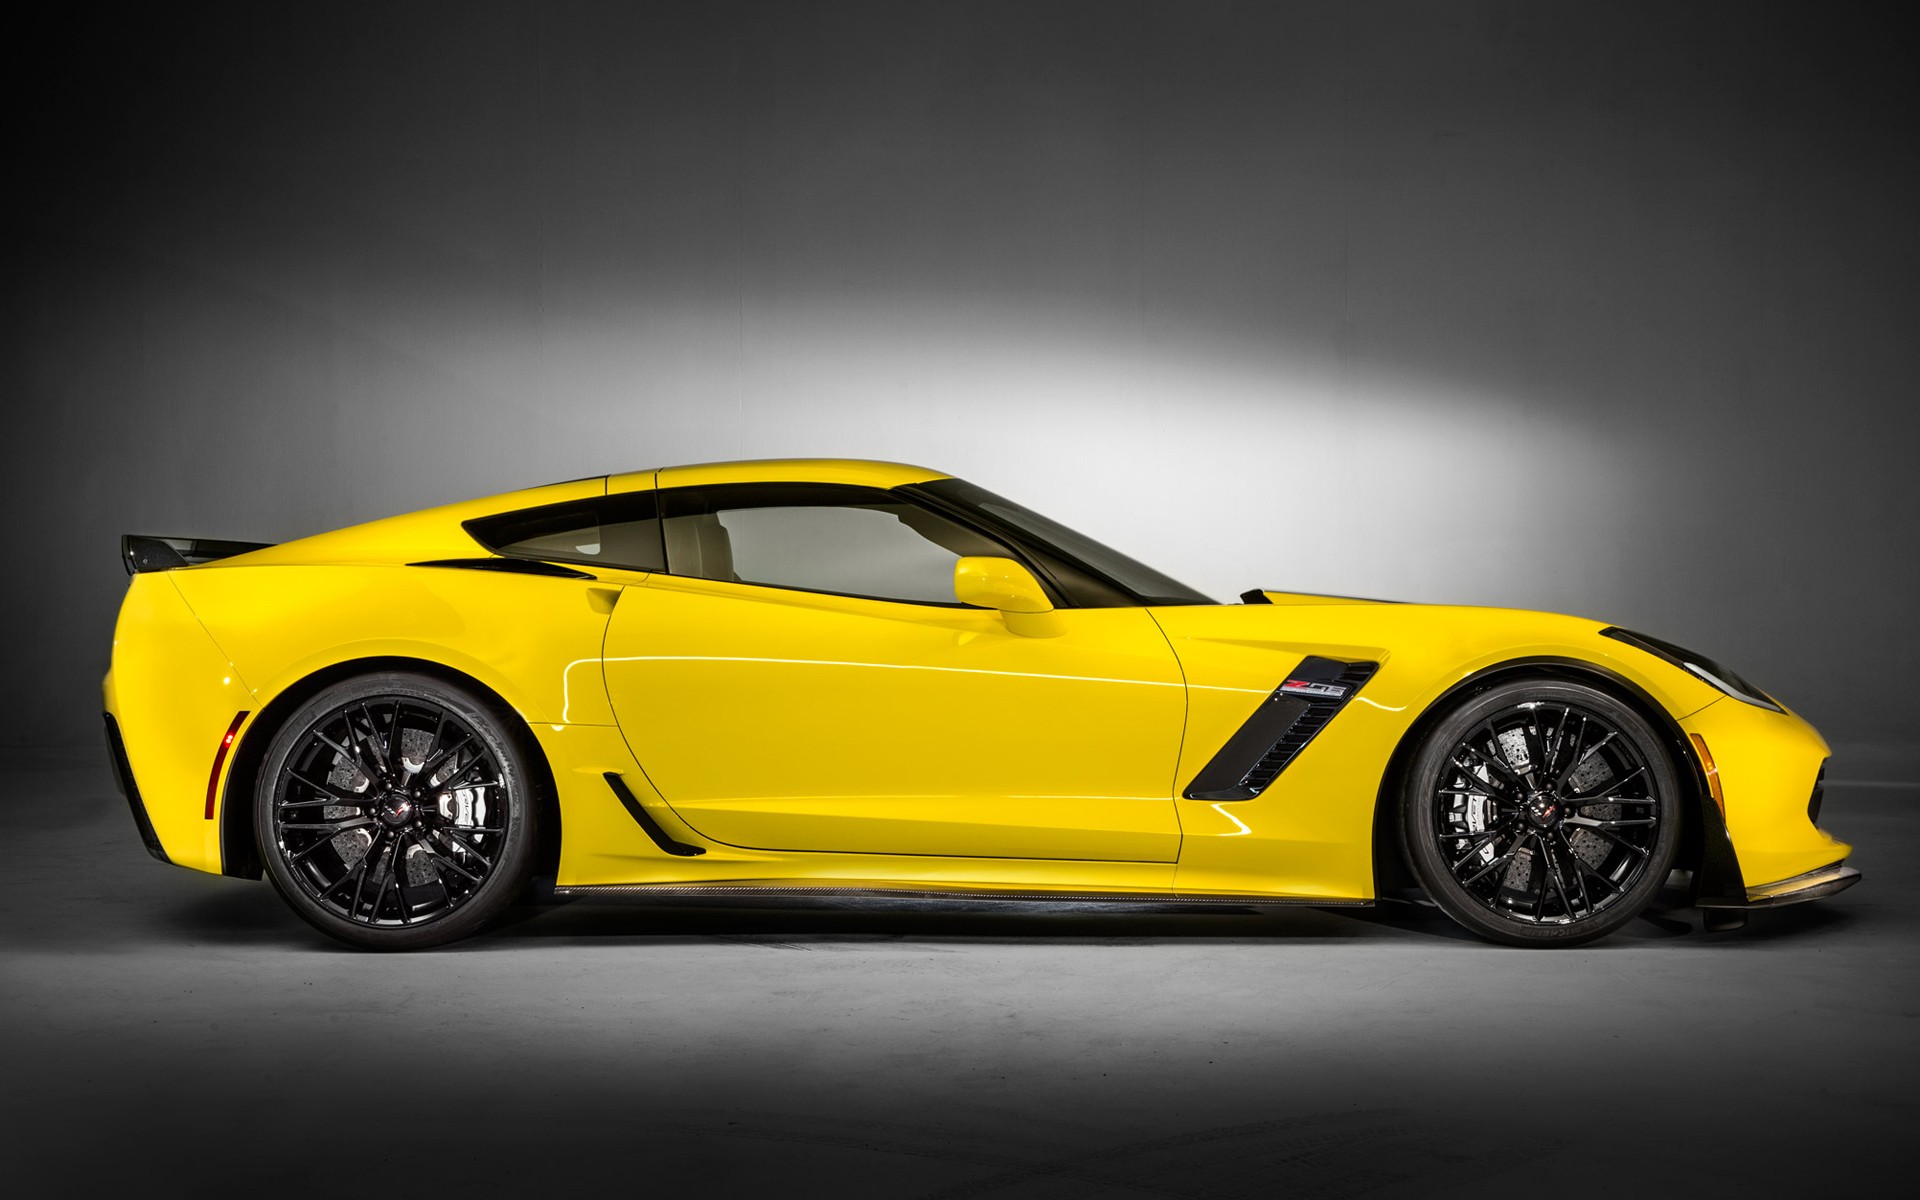 2015 Chevrolet Corvette Z06, Chevrolet Corvette Z06, Car, Yellow Cars, Side View Wallpaper